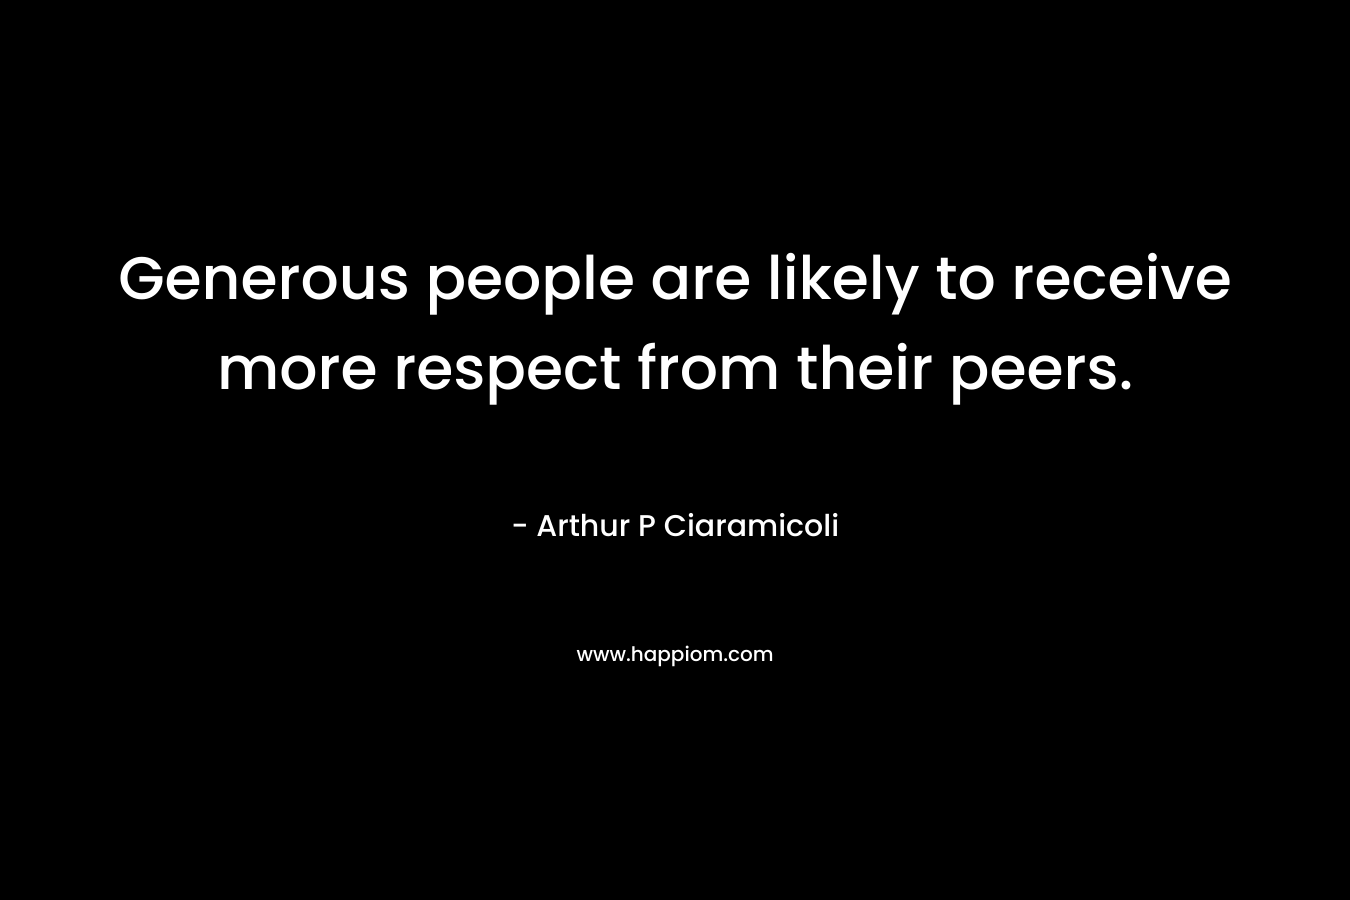 Generous people are likely to receive more respect from their peers.